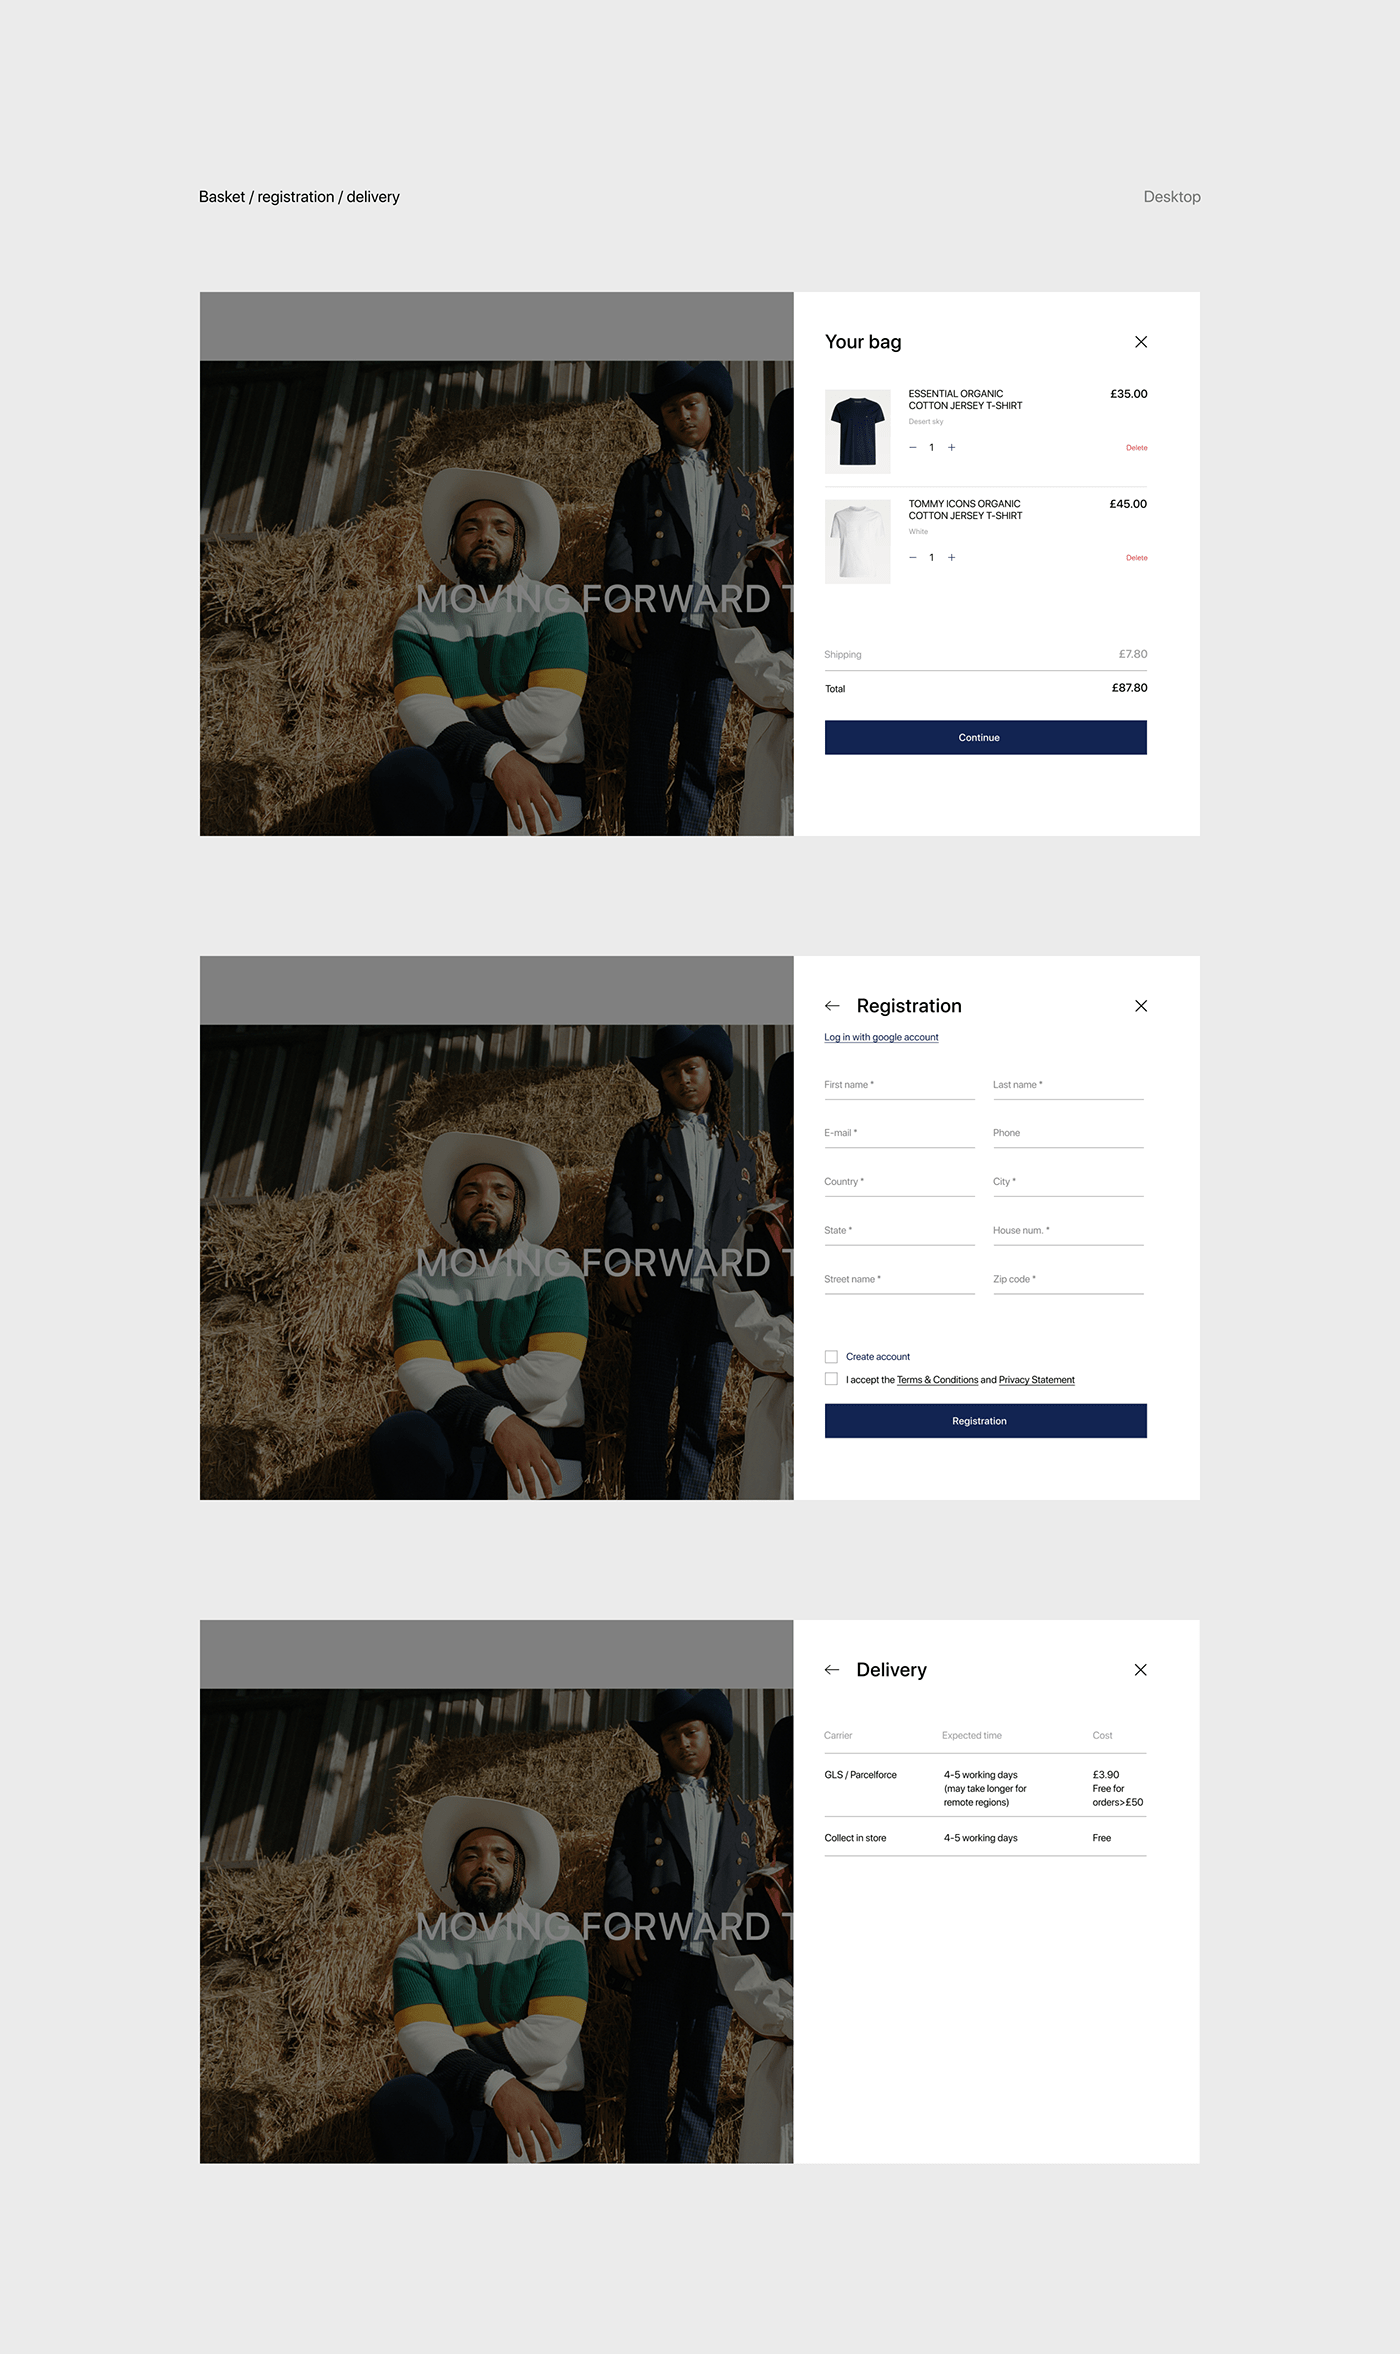 boutique Clothing e-commerce Fashion  redesign tommy hilfiger UI ux Website